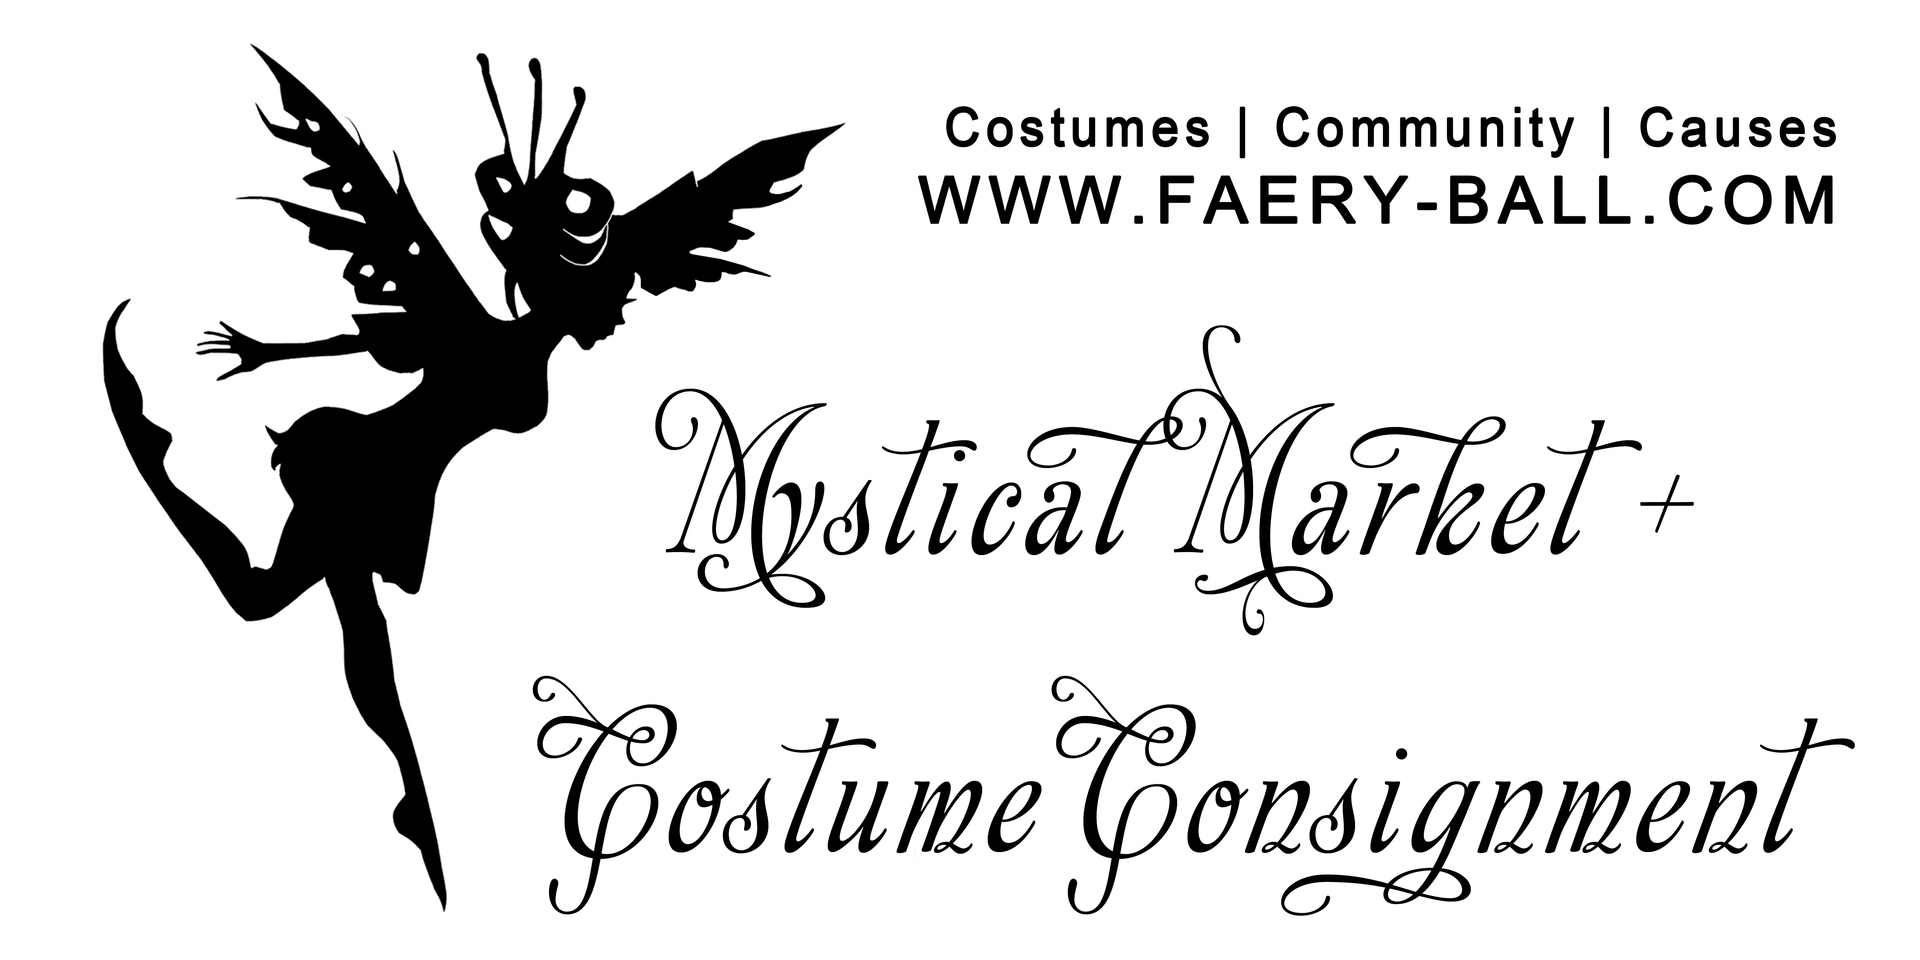 1st Annual Mystical Market & Costume / Garb / Formal Consignment Sale, D'Iberville, Mississippi, United States